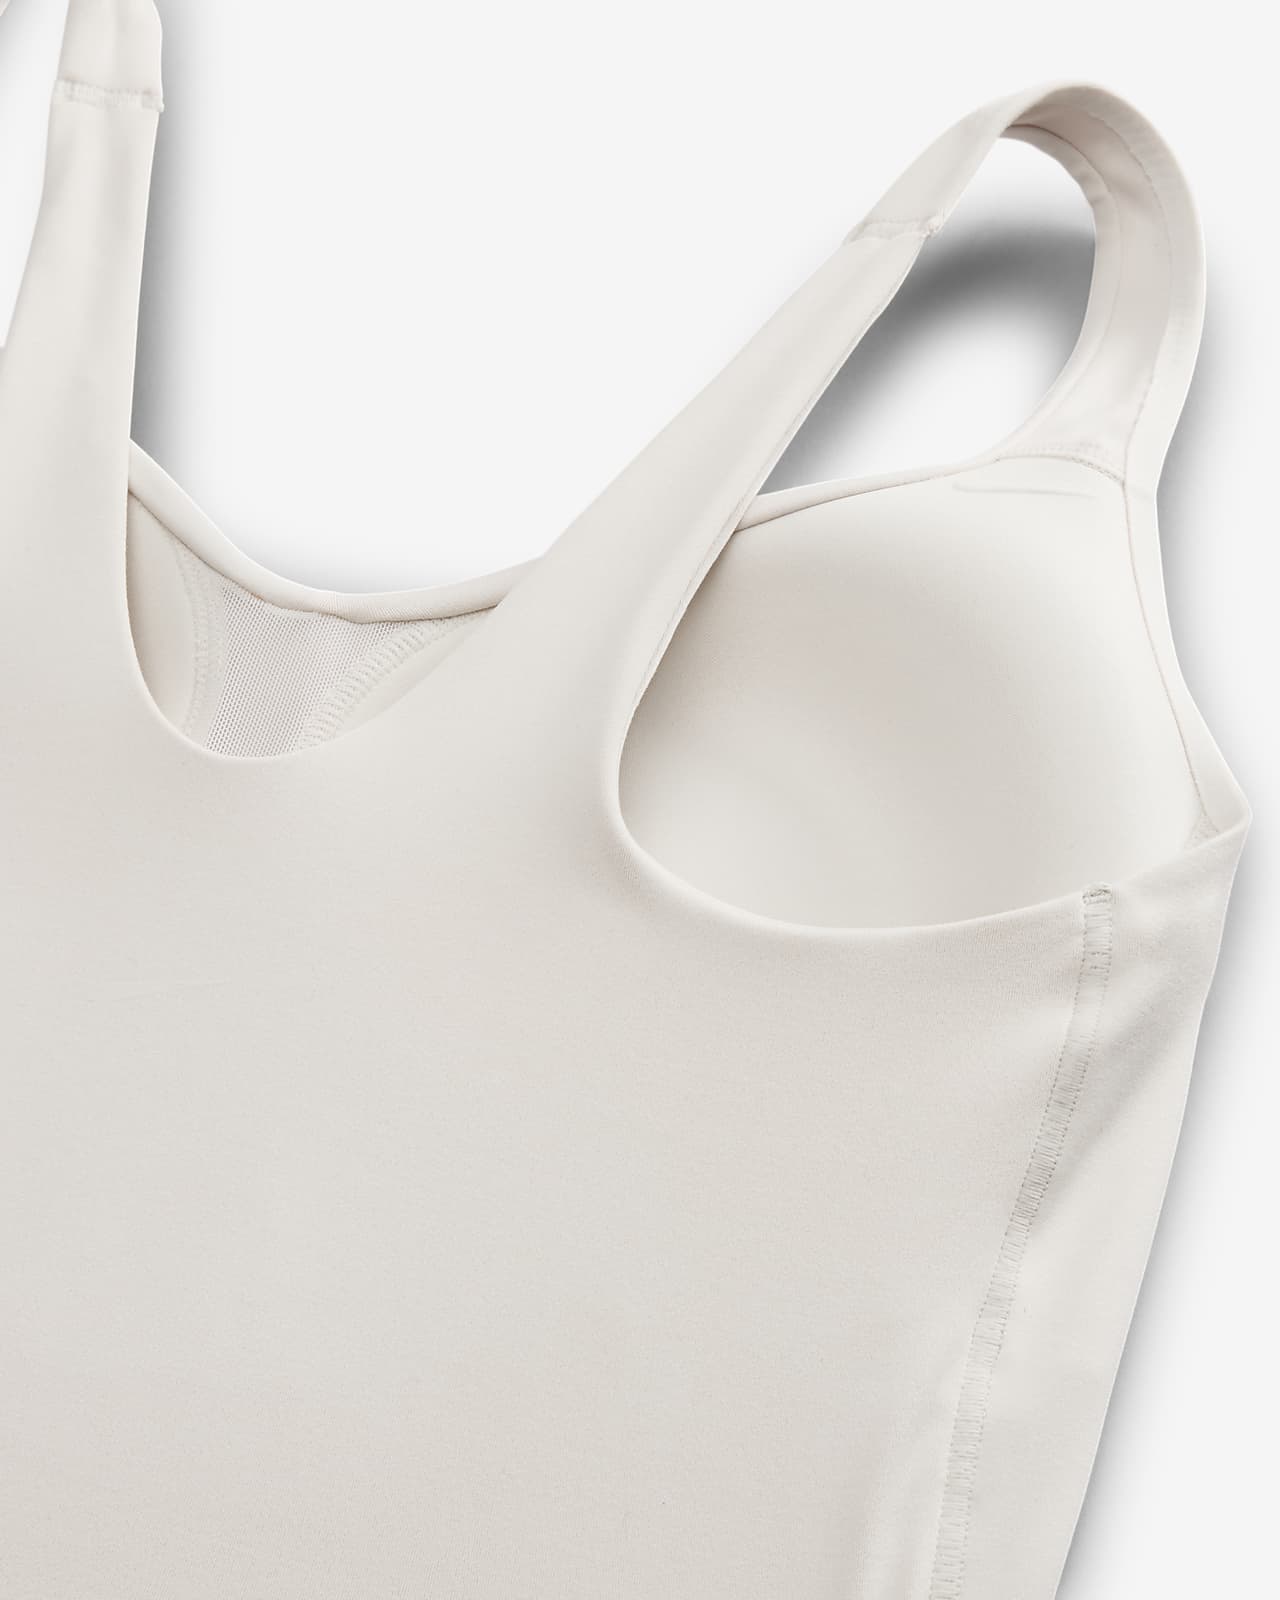 Alate Medium-Support Padded Sports Bra Tank Top by Nike Online